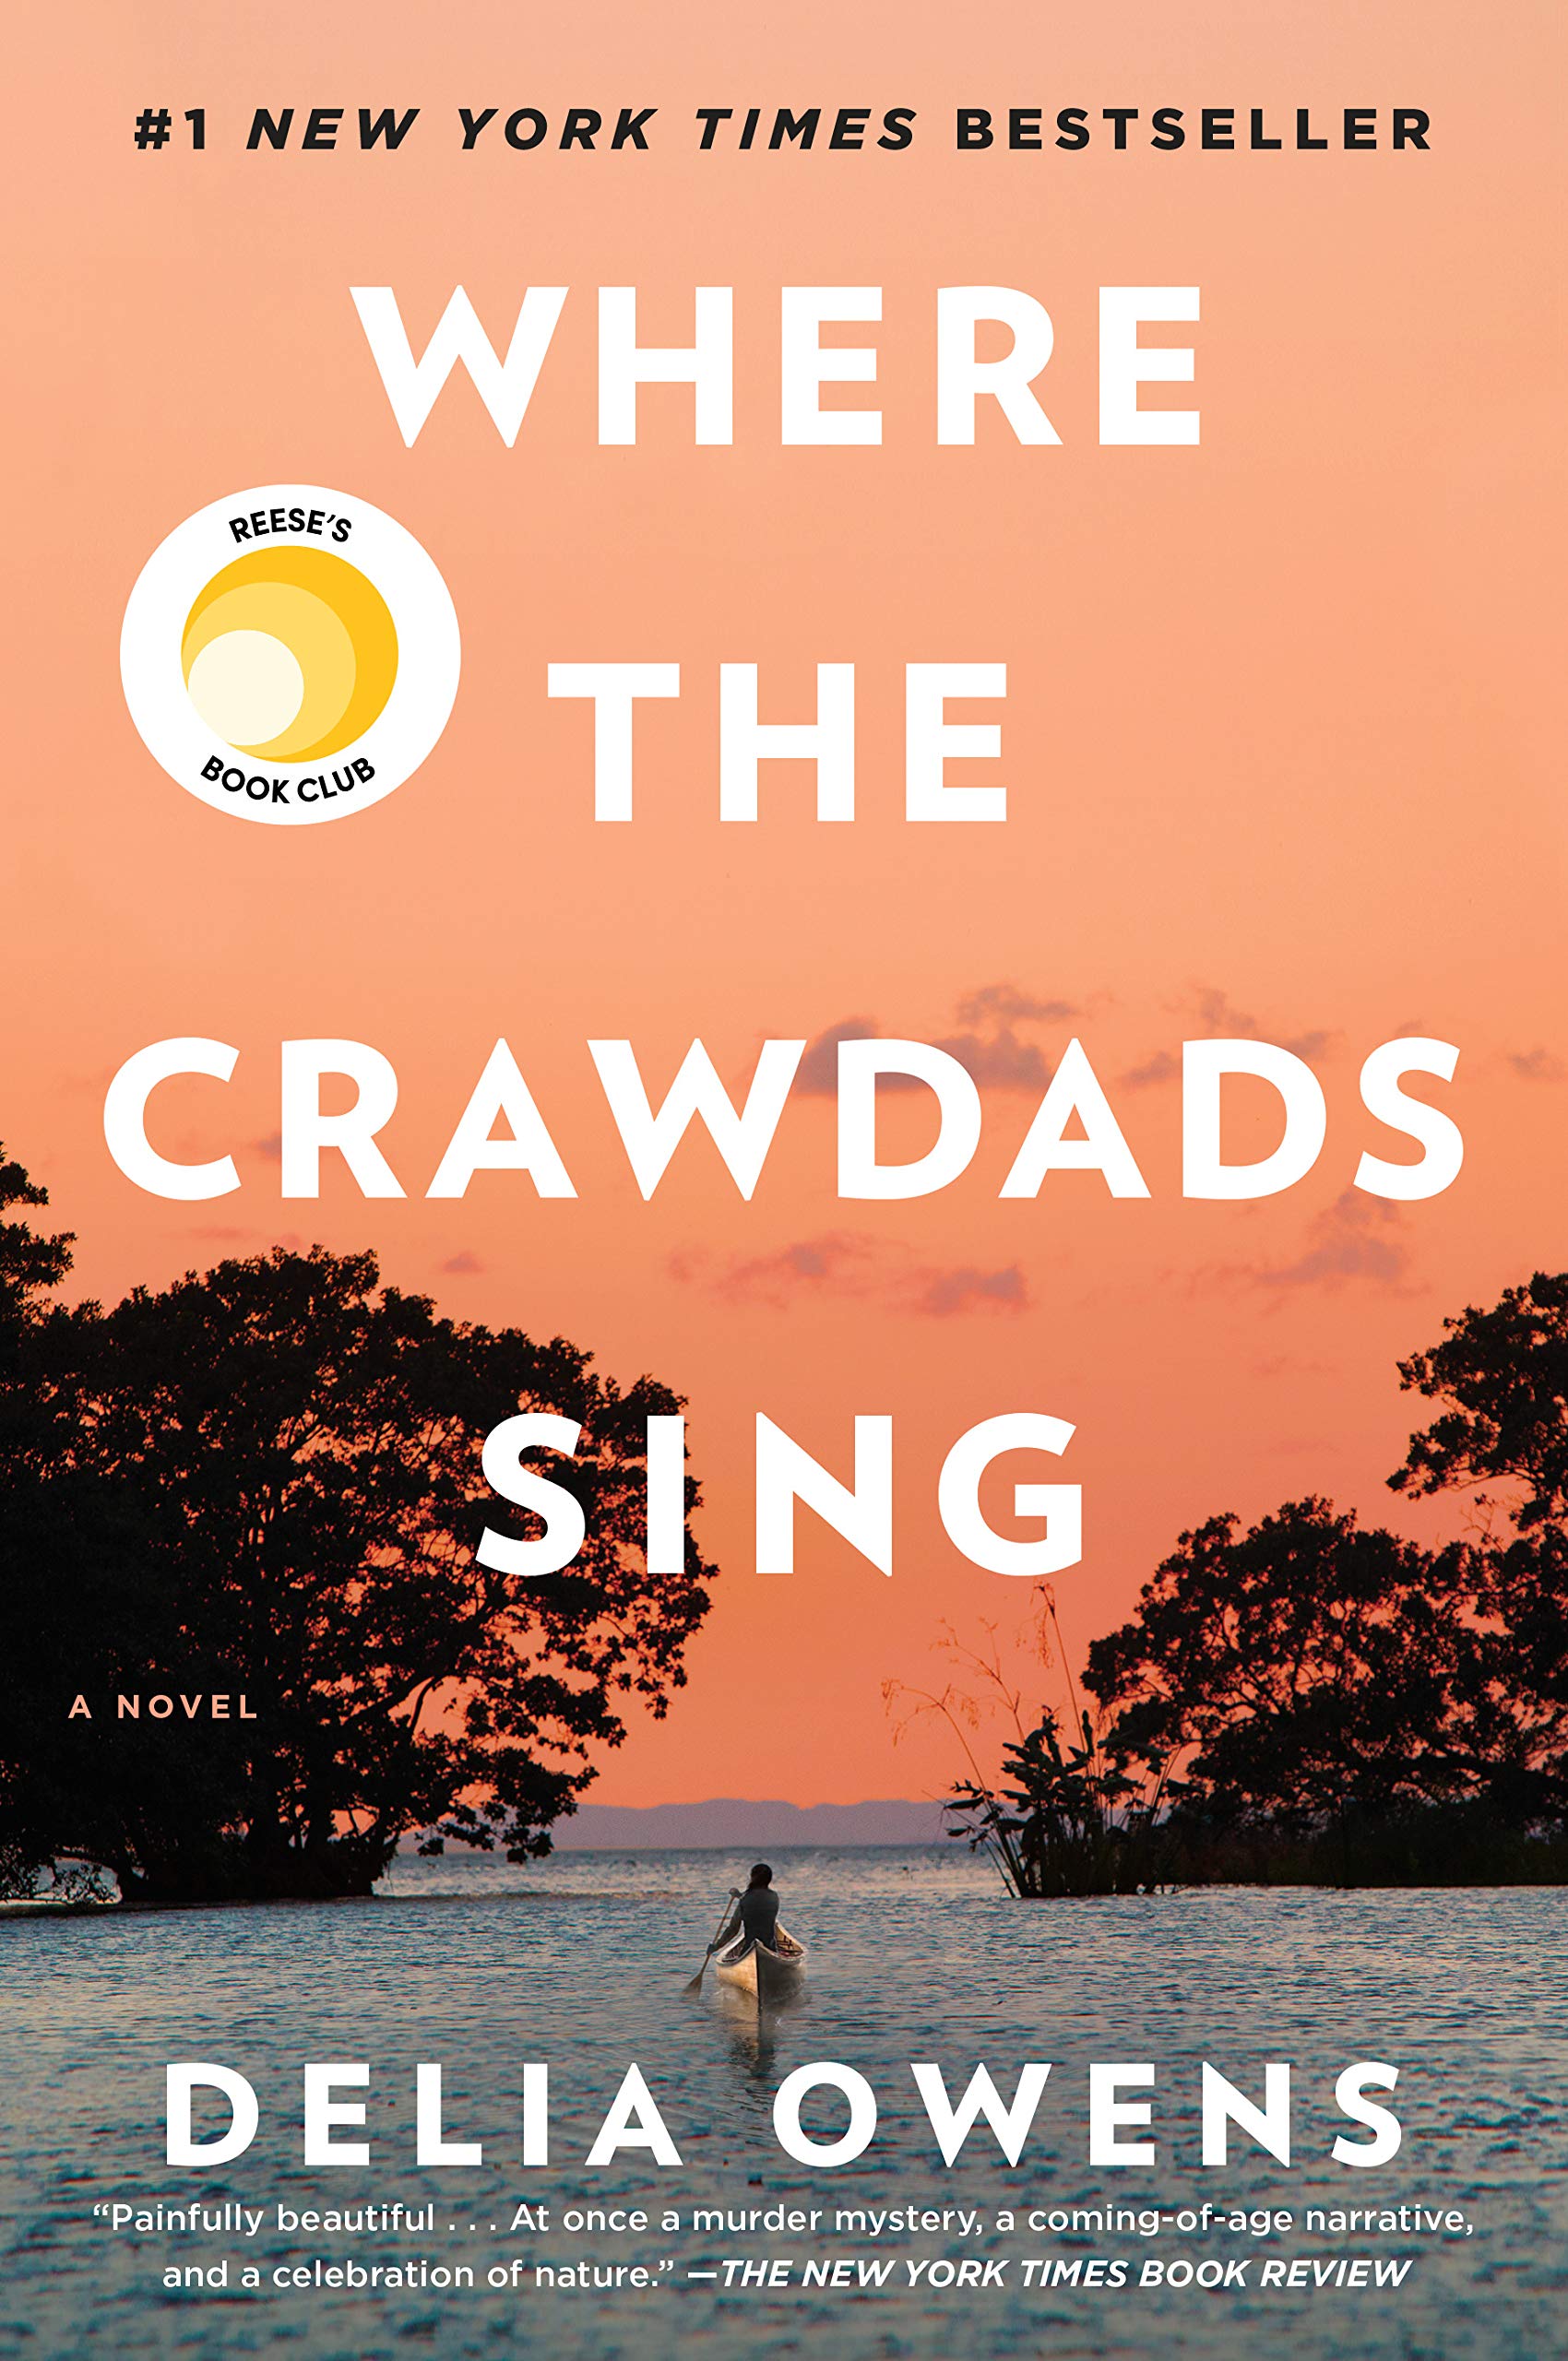 Book cover for Where the Crawdads Sing by Delia Owens